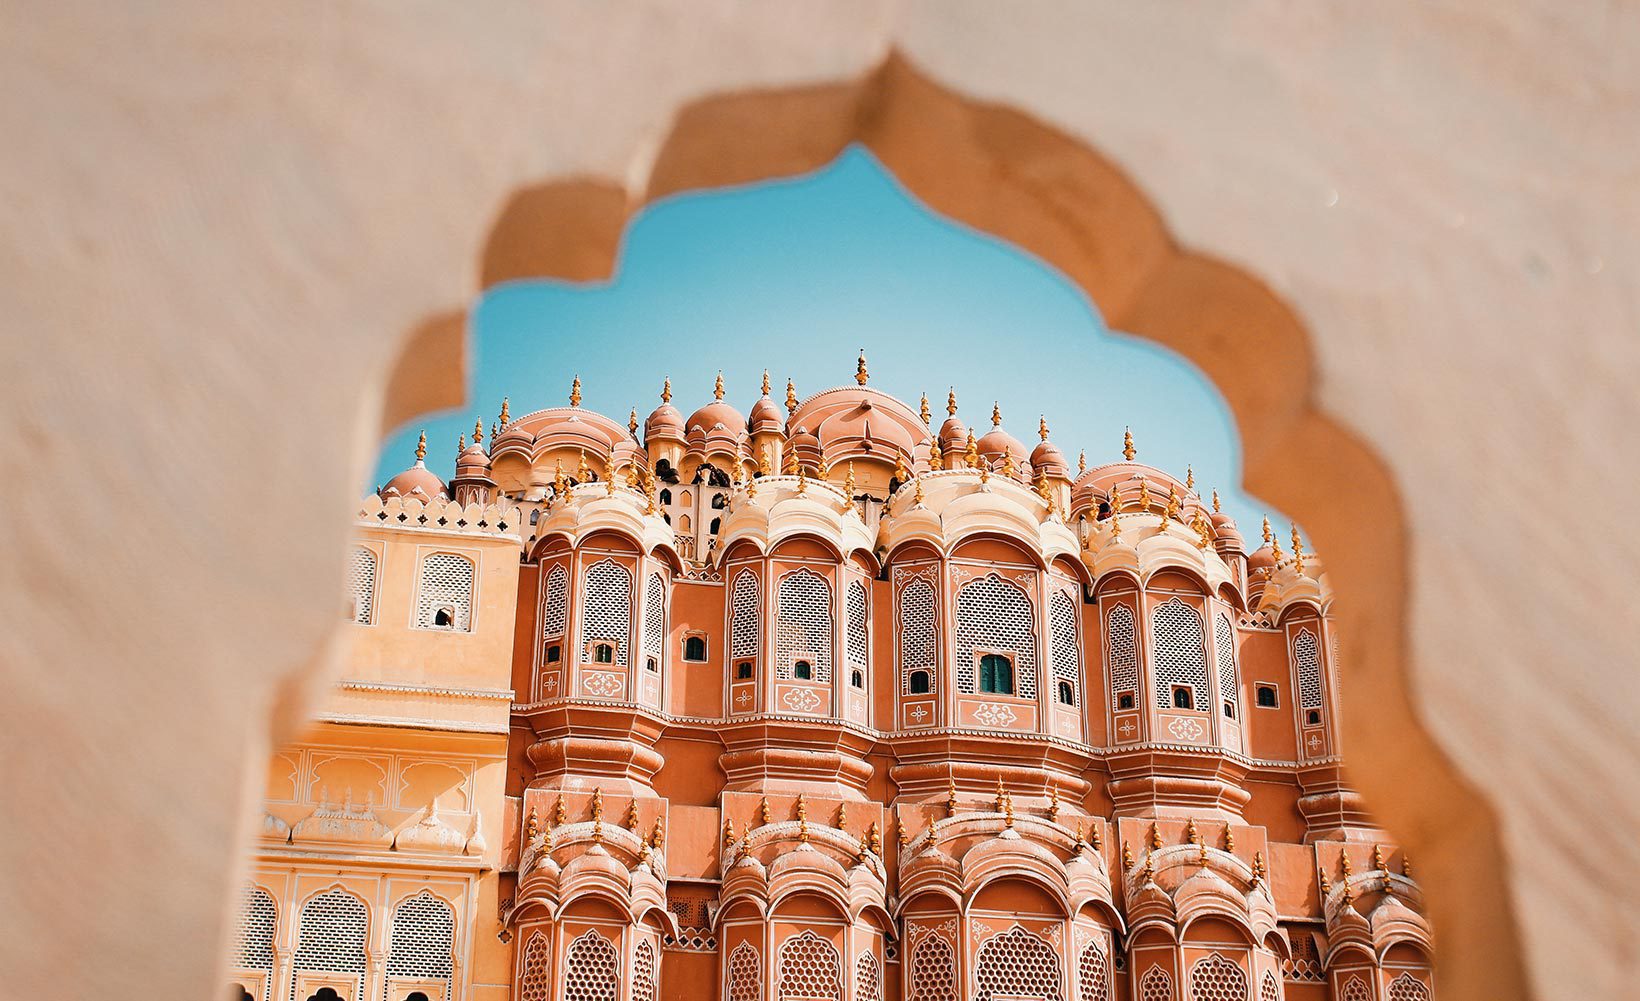 15 Things You Didn’t Know About Jaipur